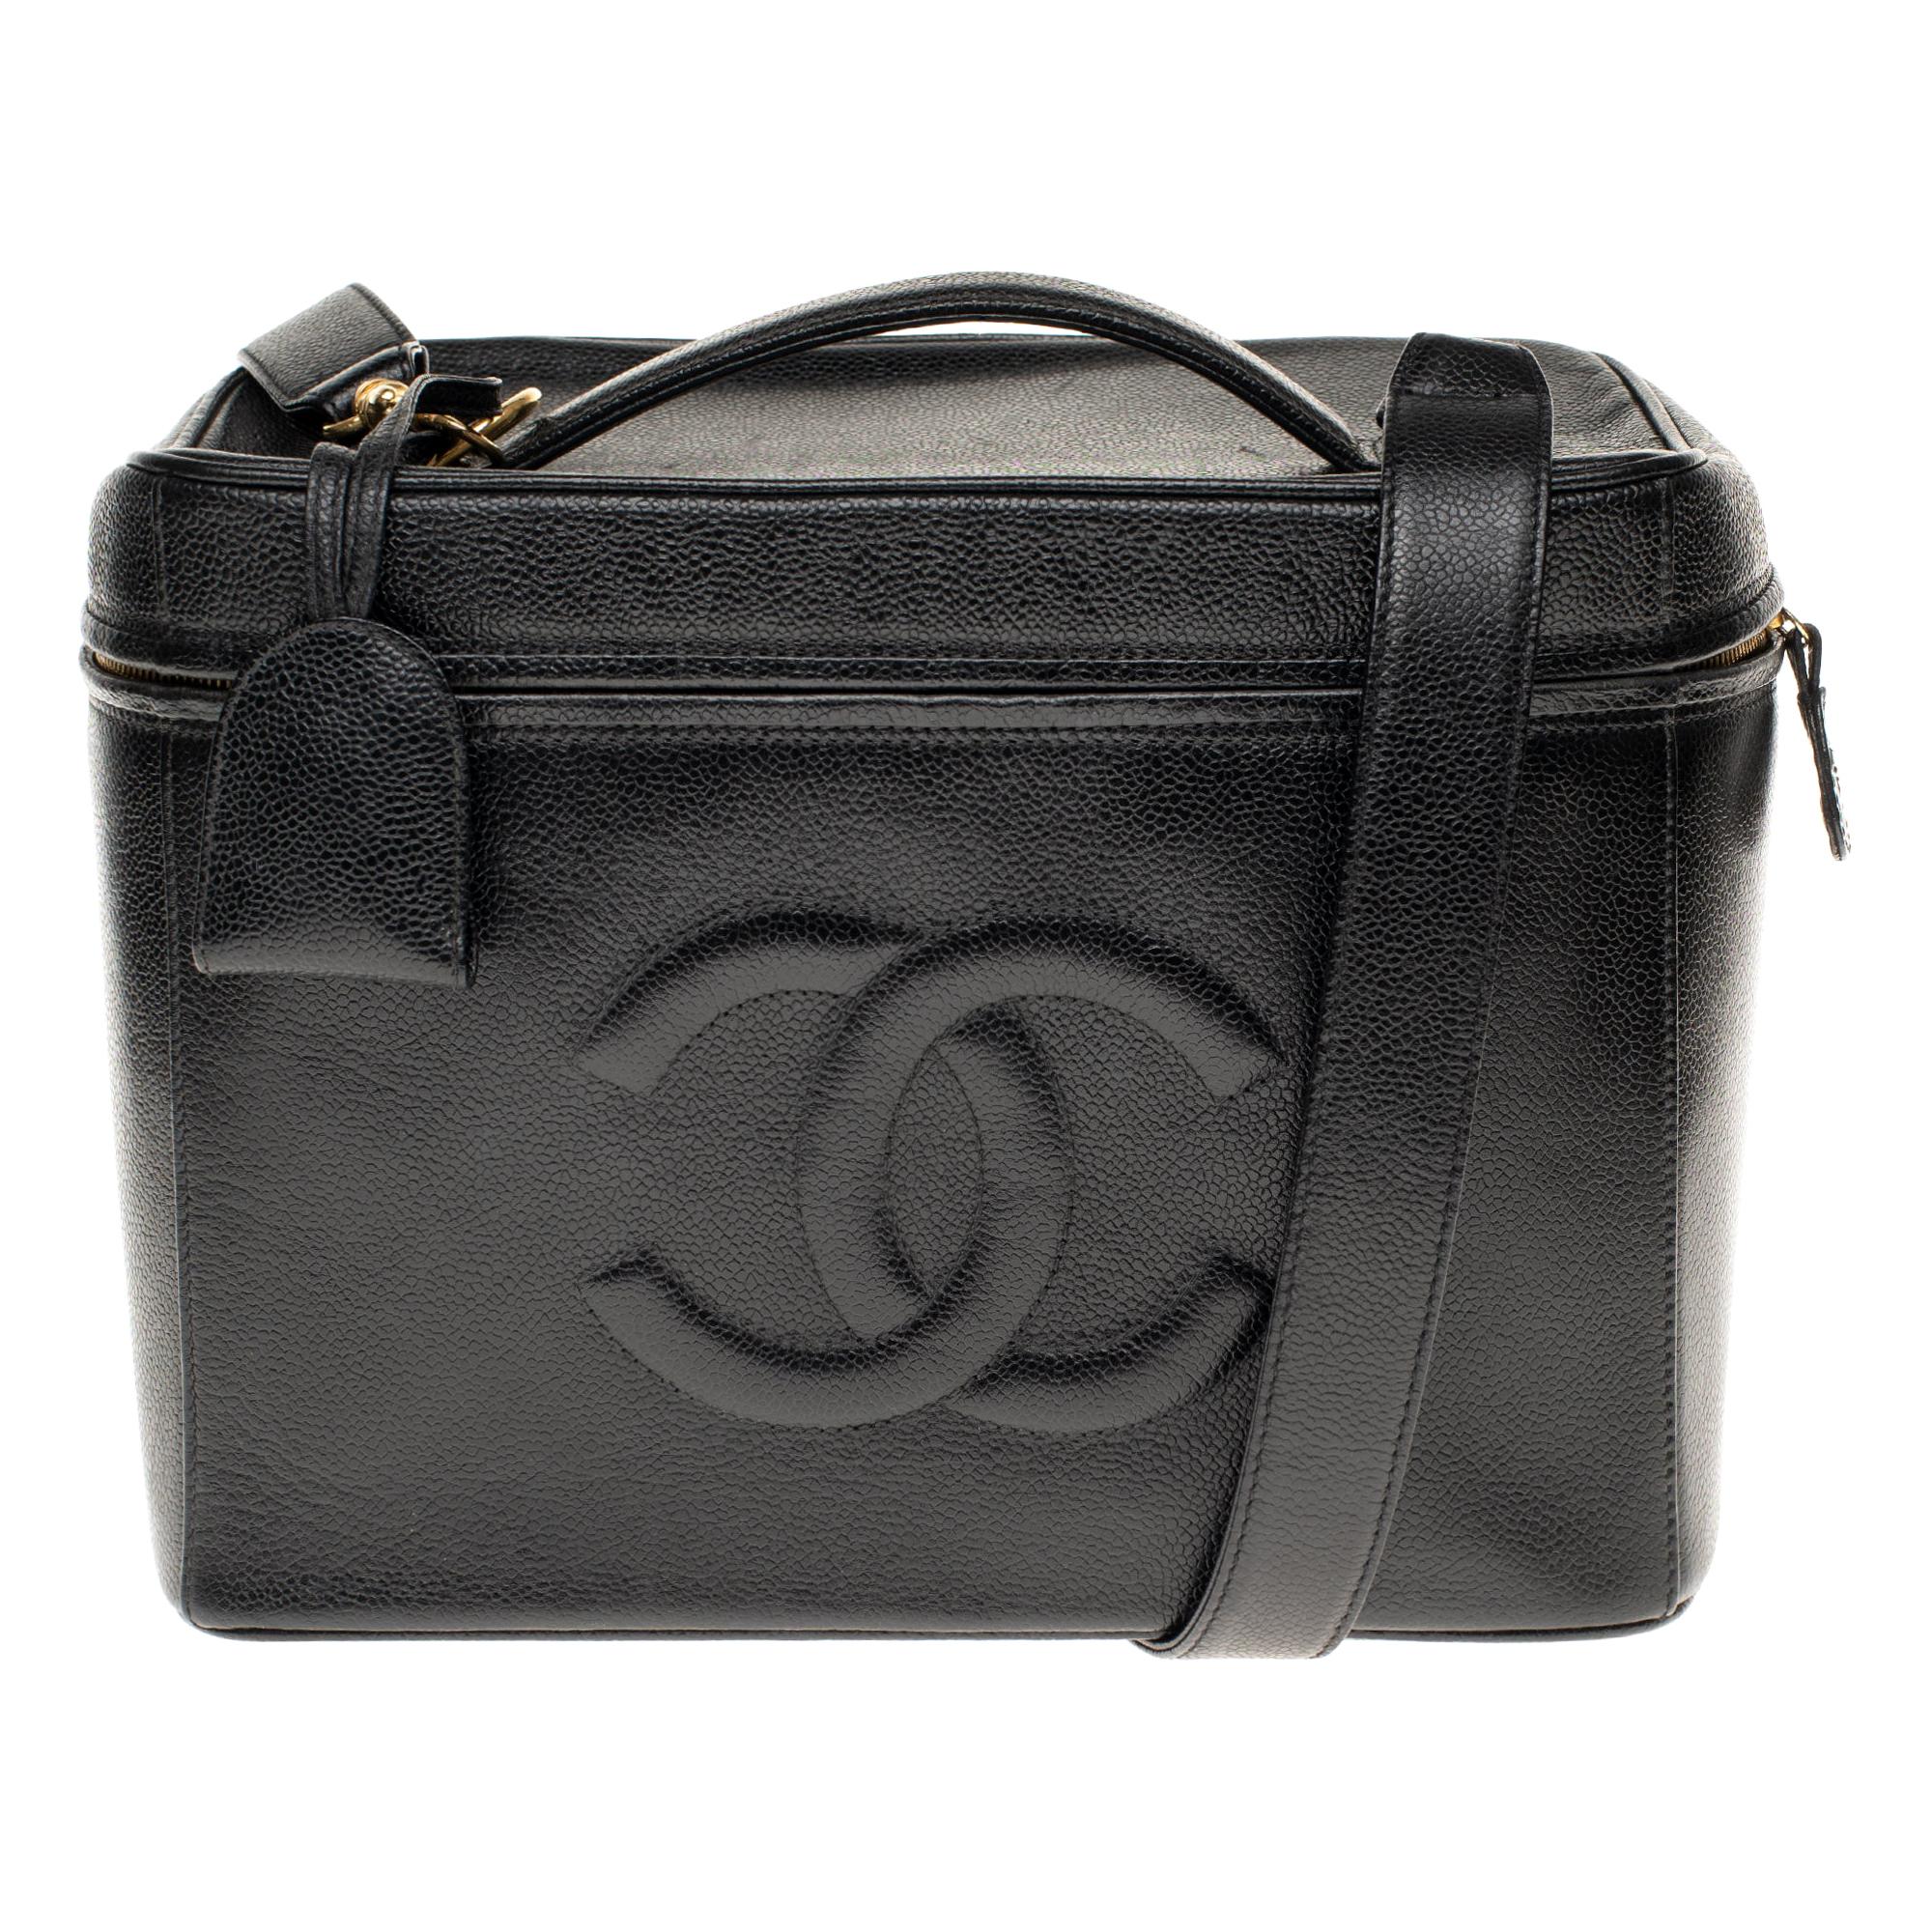 Rare Chanel Vanity Case in Caviar black leather with strap , gold ...